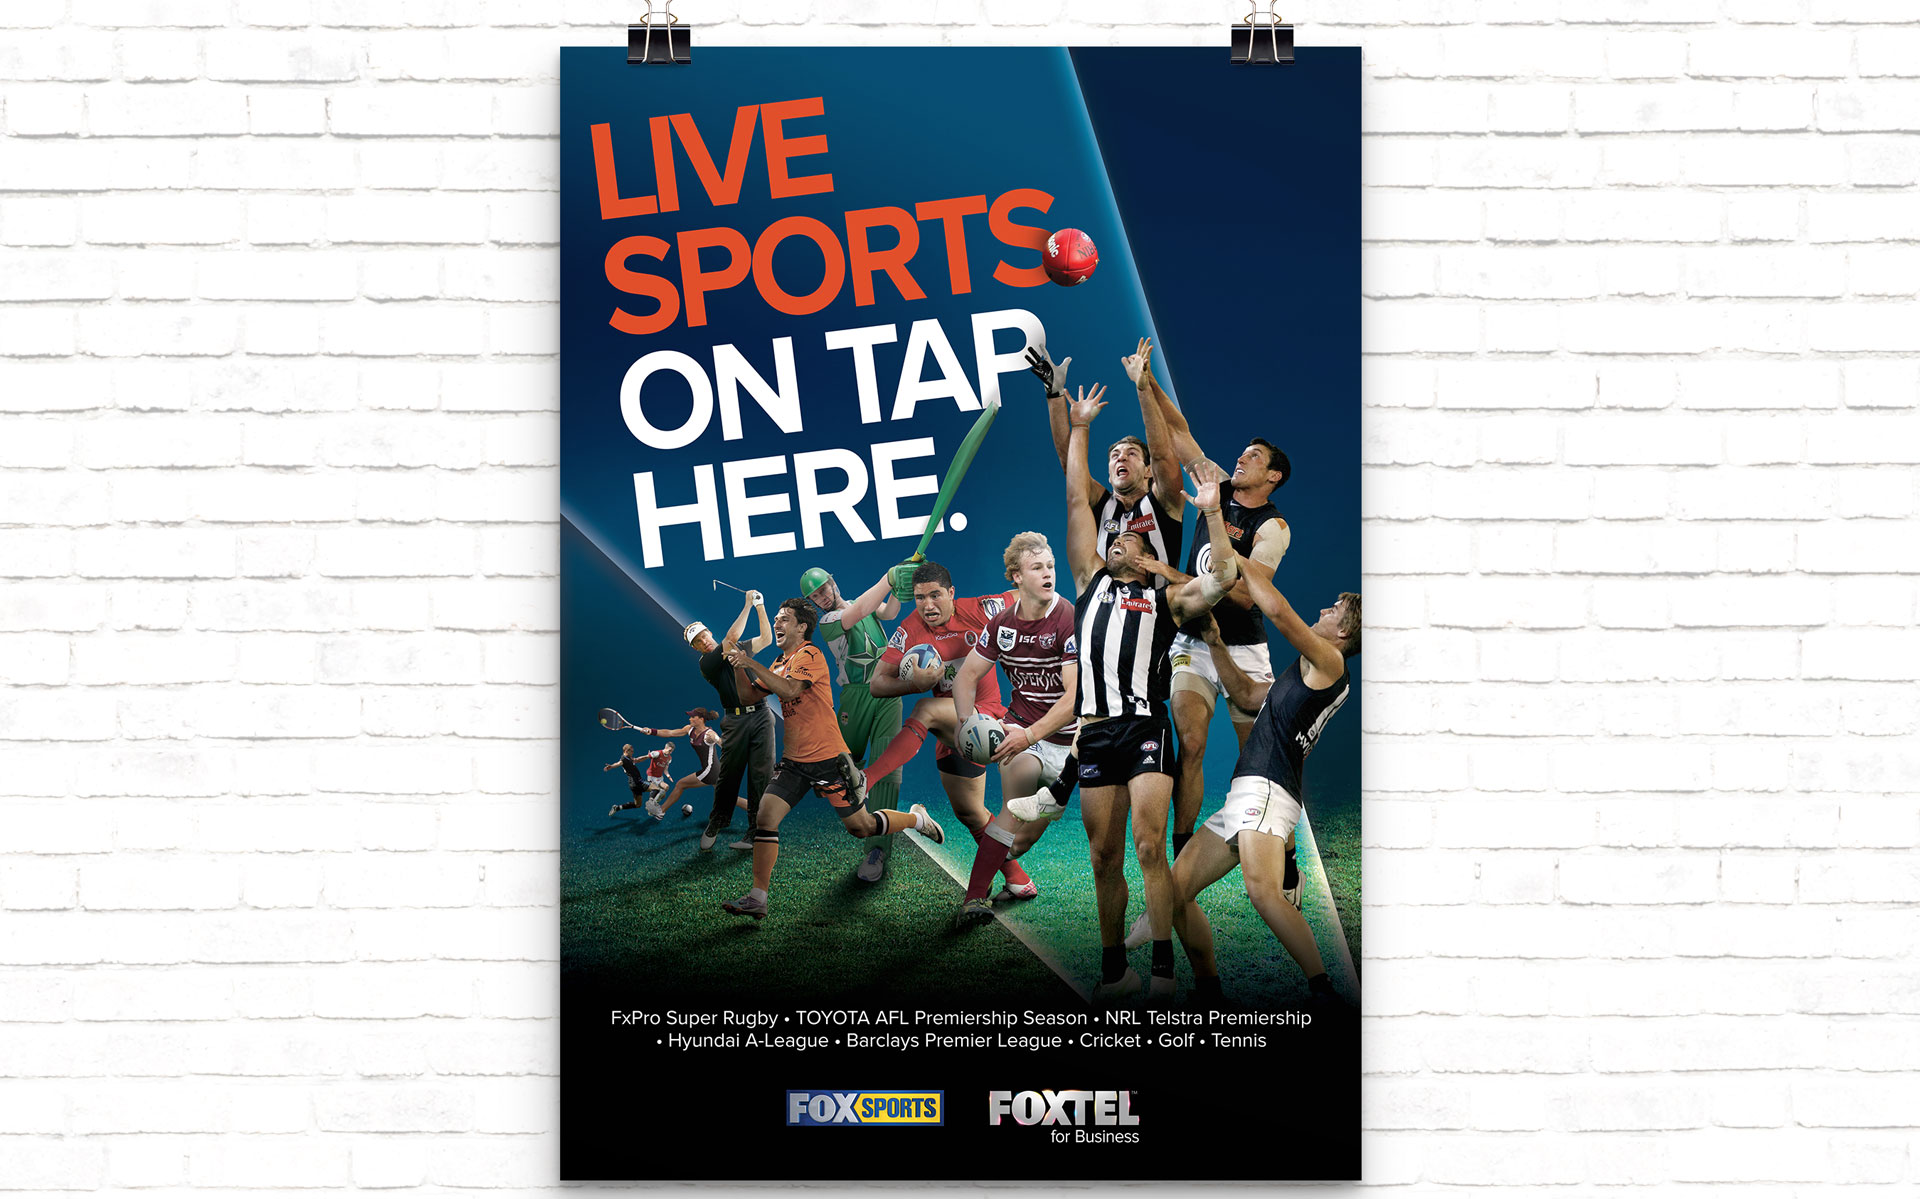 FOXTEL marketing, advertising & publications designed by Amy Howard